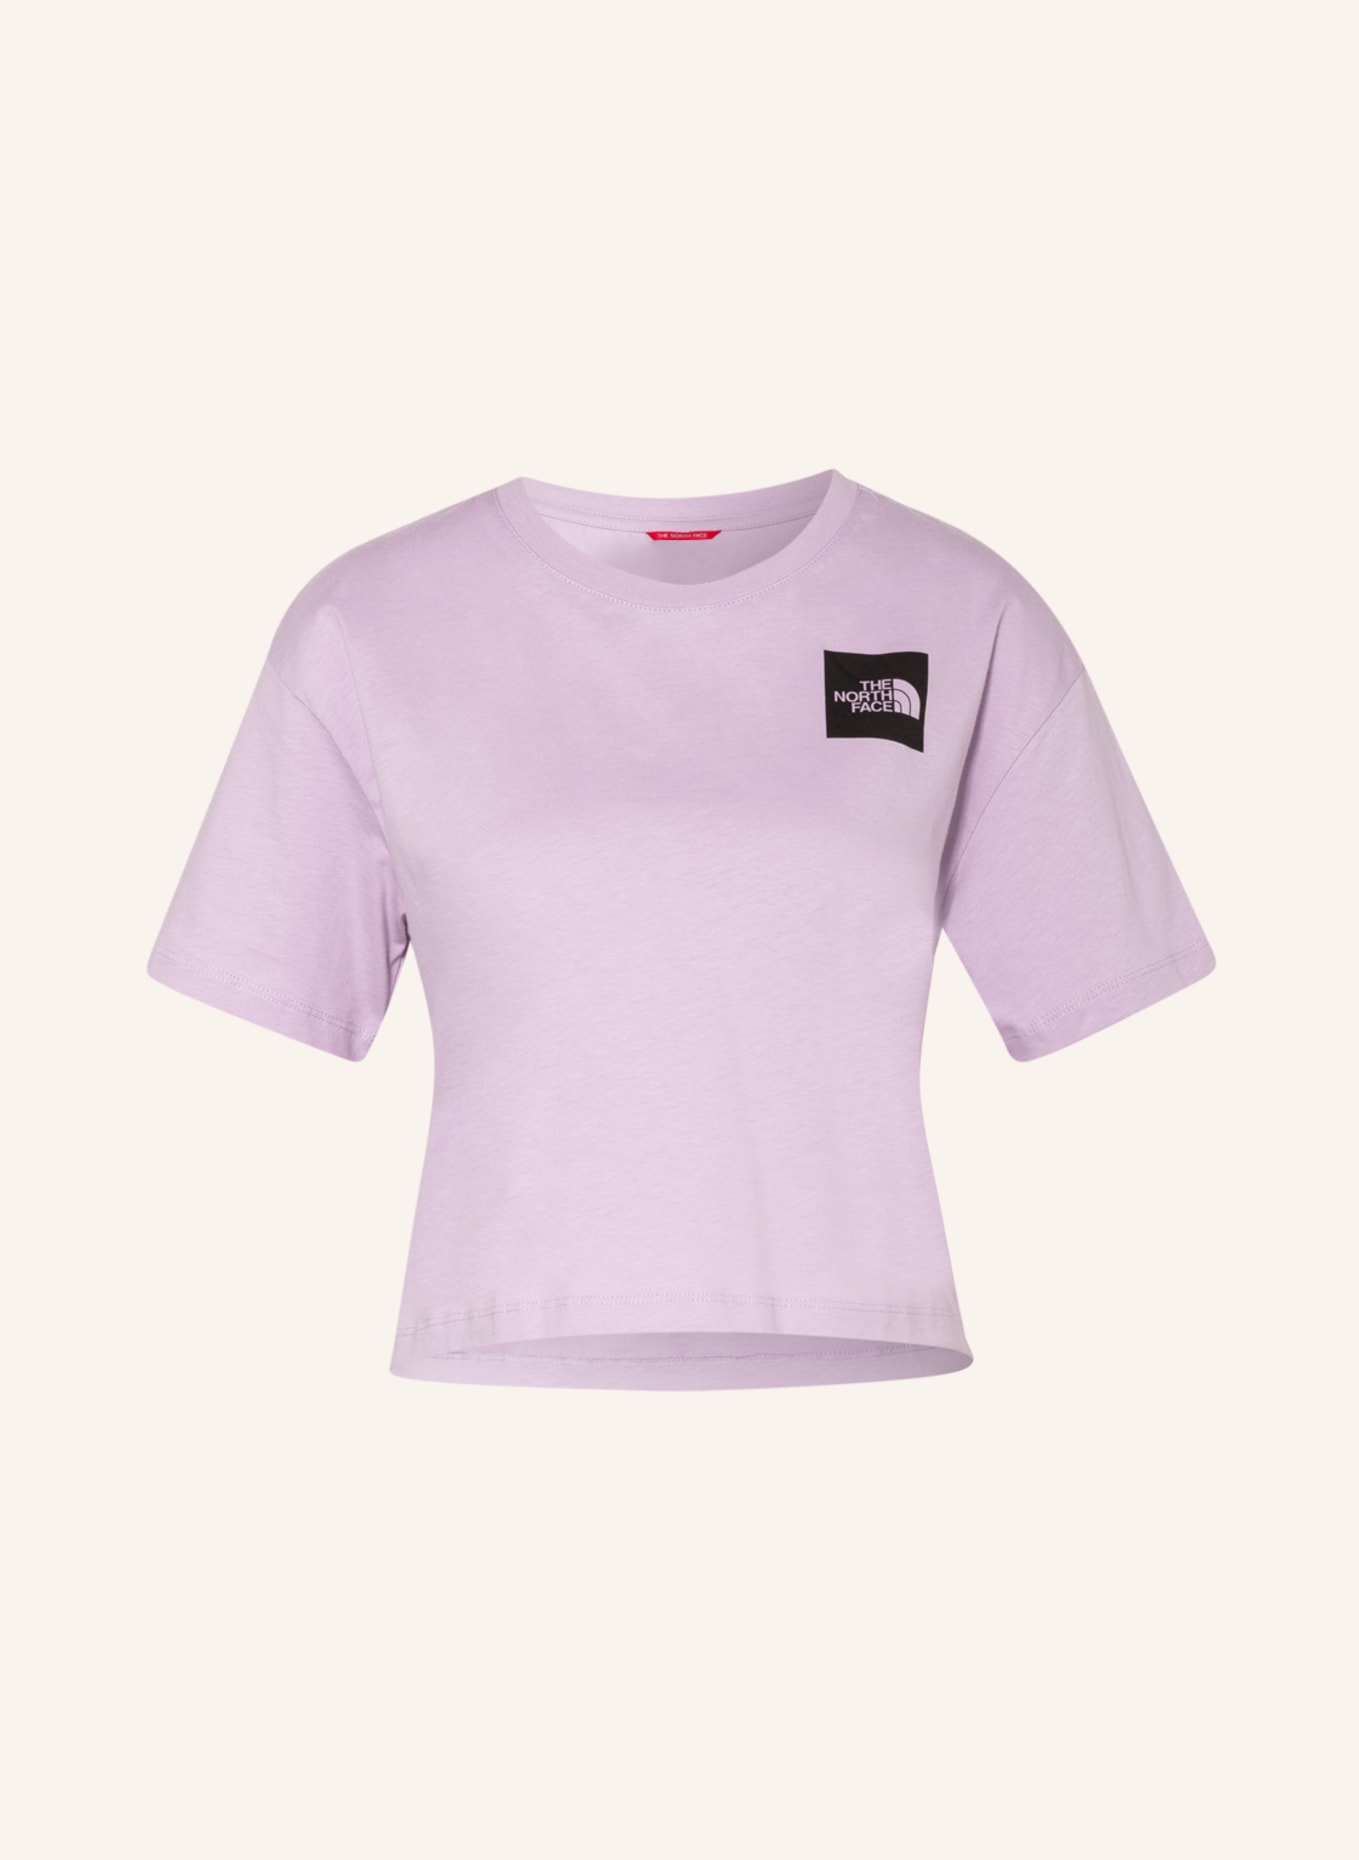 THE NORTH FACE Cropped-Shirt FINE TEE, Farbe: HELLLILA (Bild 1)